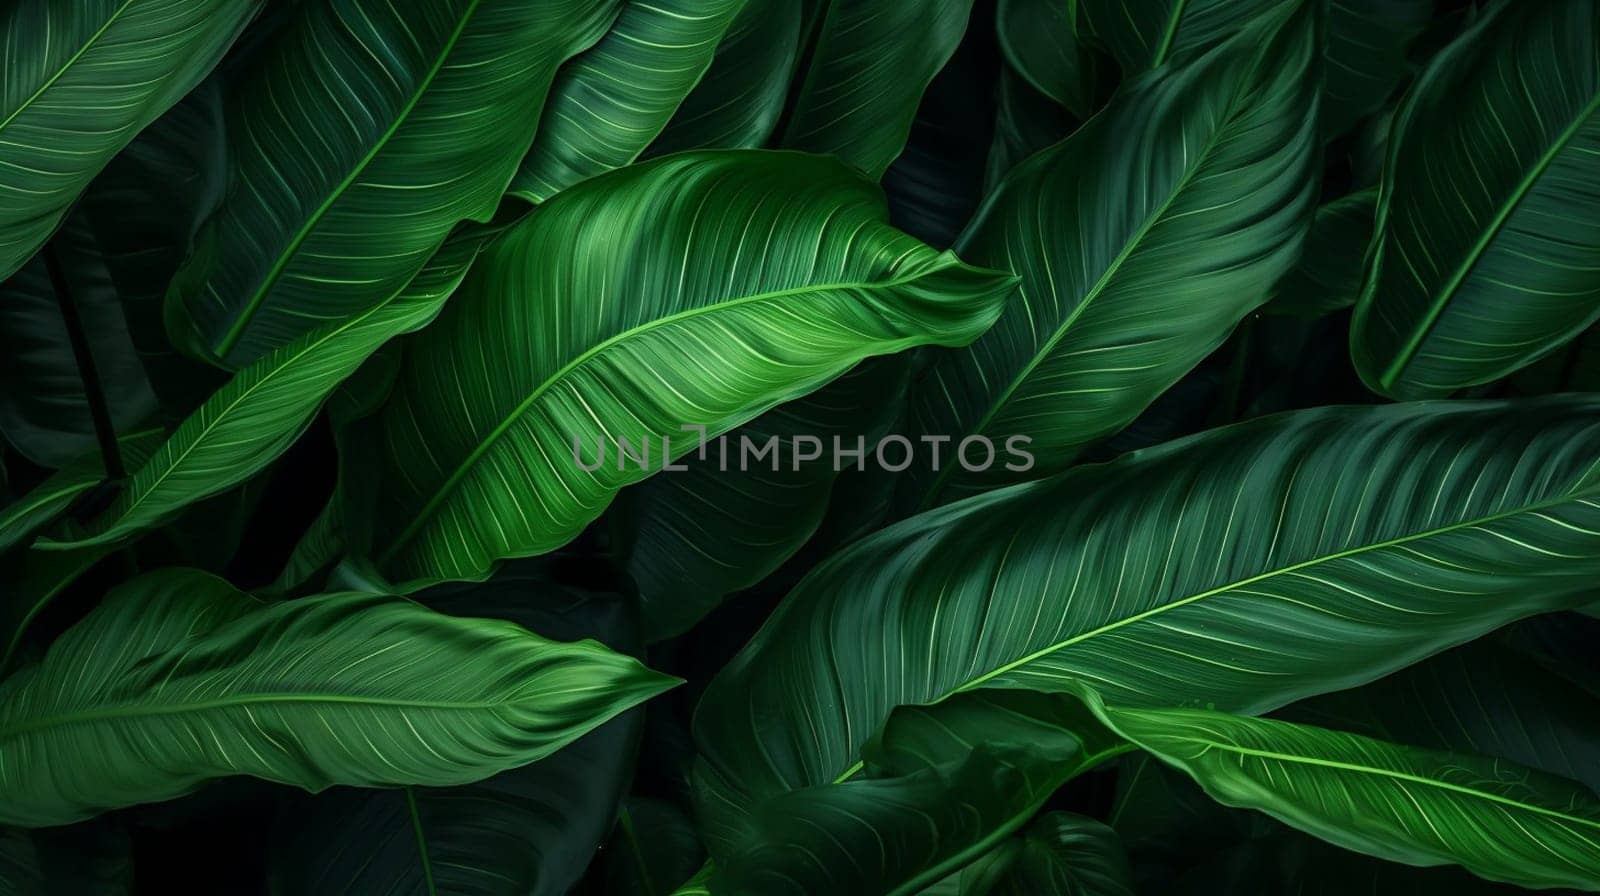 Lush green leaves with intricate patterns, full frame, vibrant. High quality photo